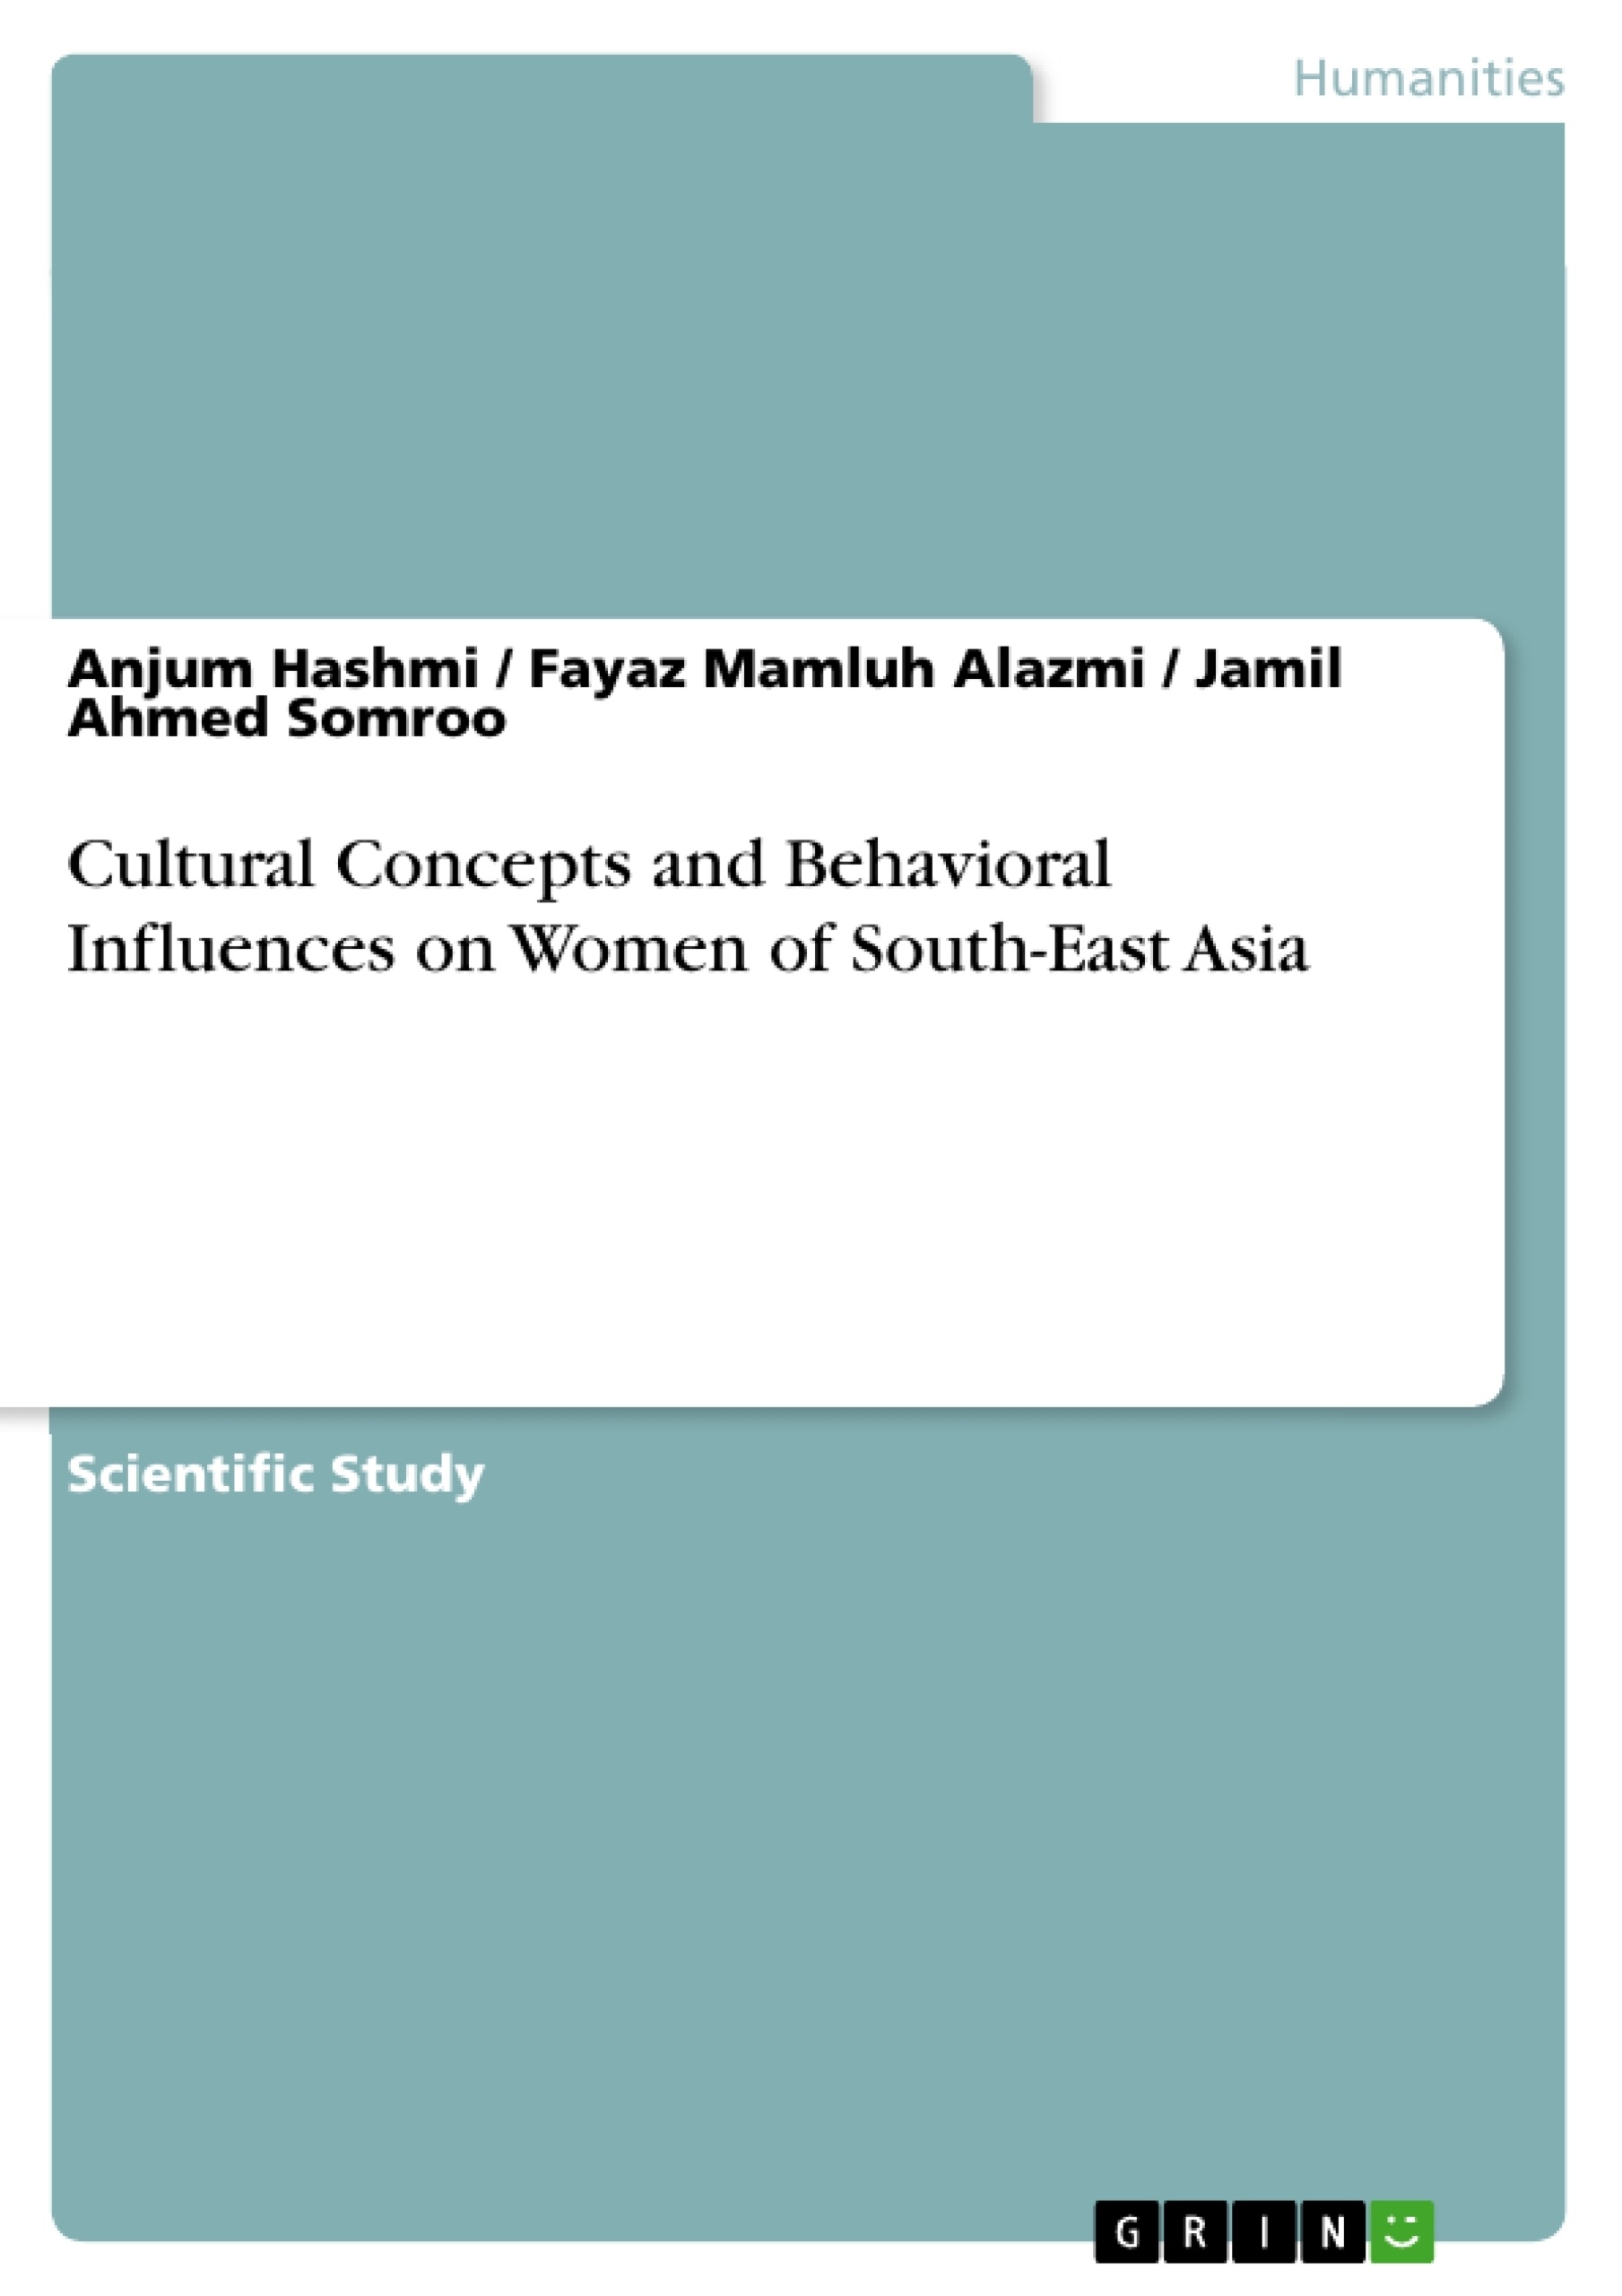 Titel: Cultural Concepts and Behavioral Influences on Women of South-East Asia